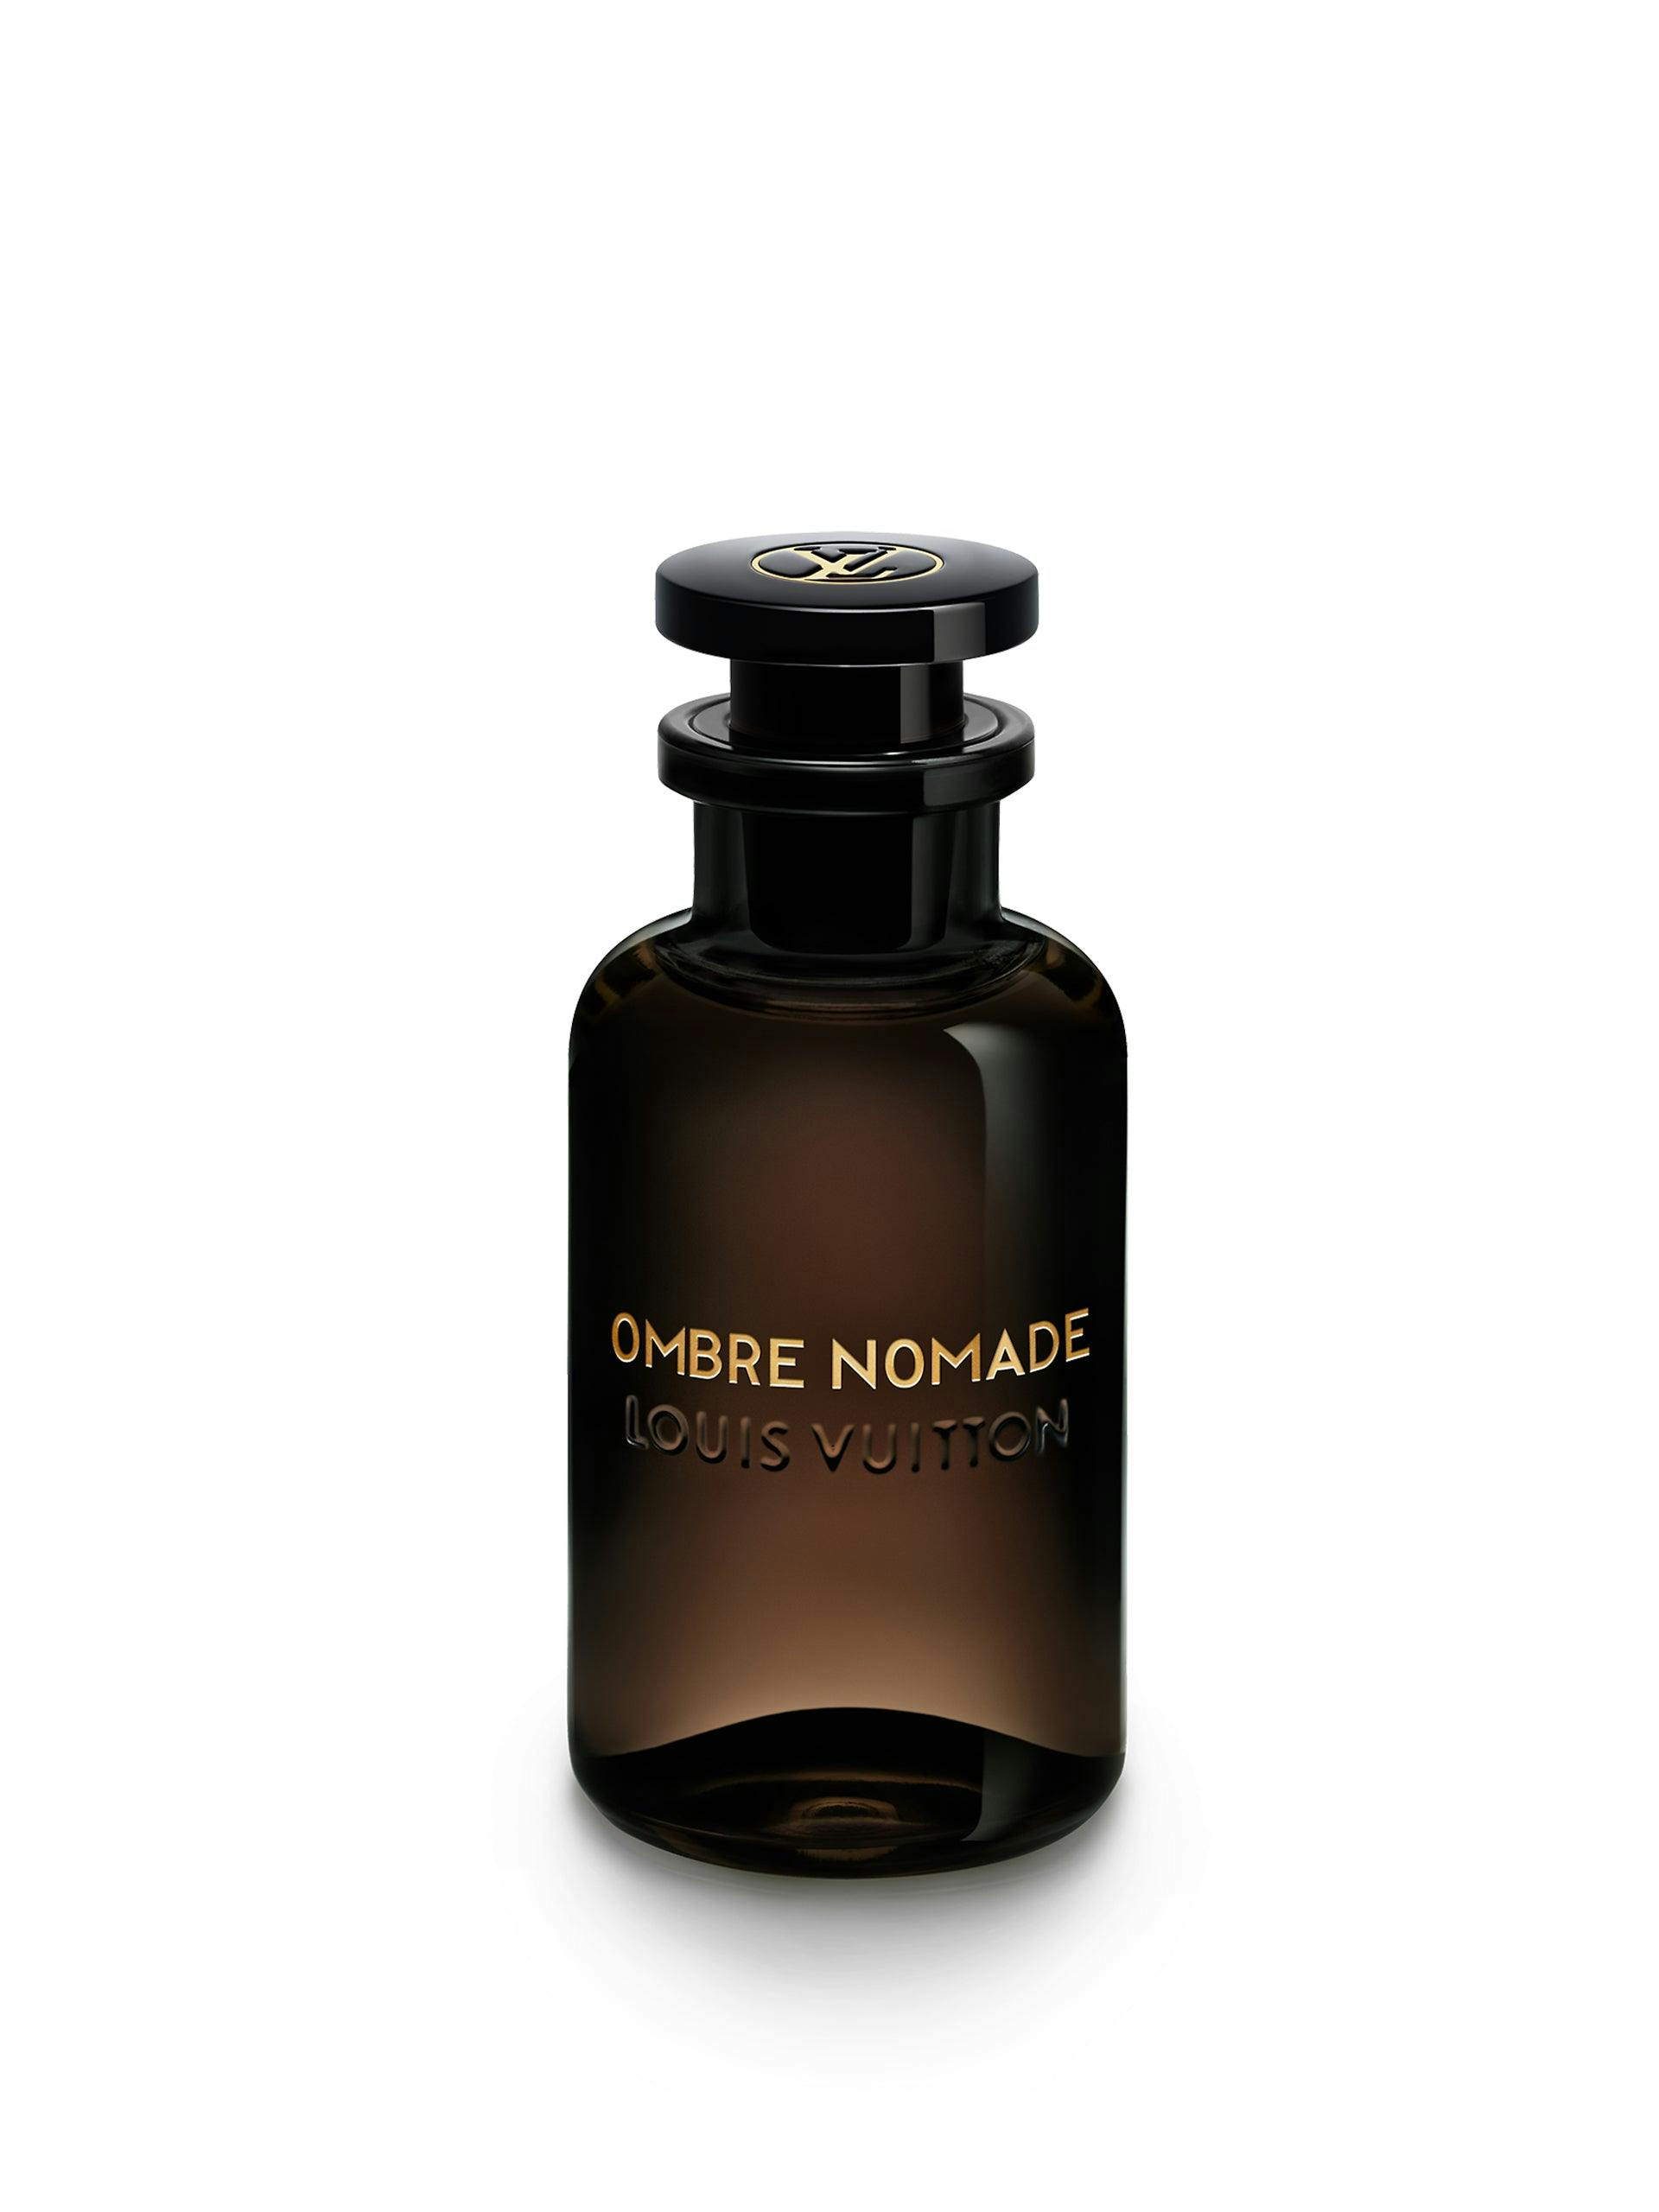 Ombre Nomade perfume